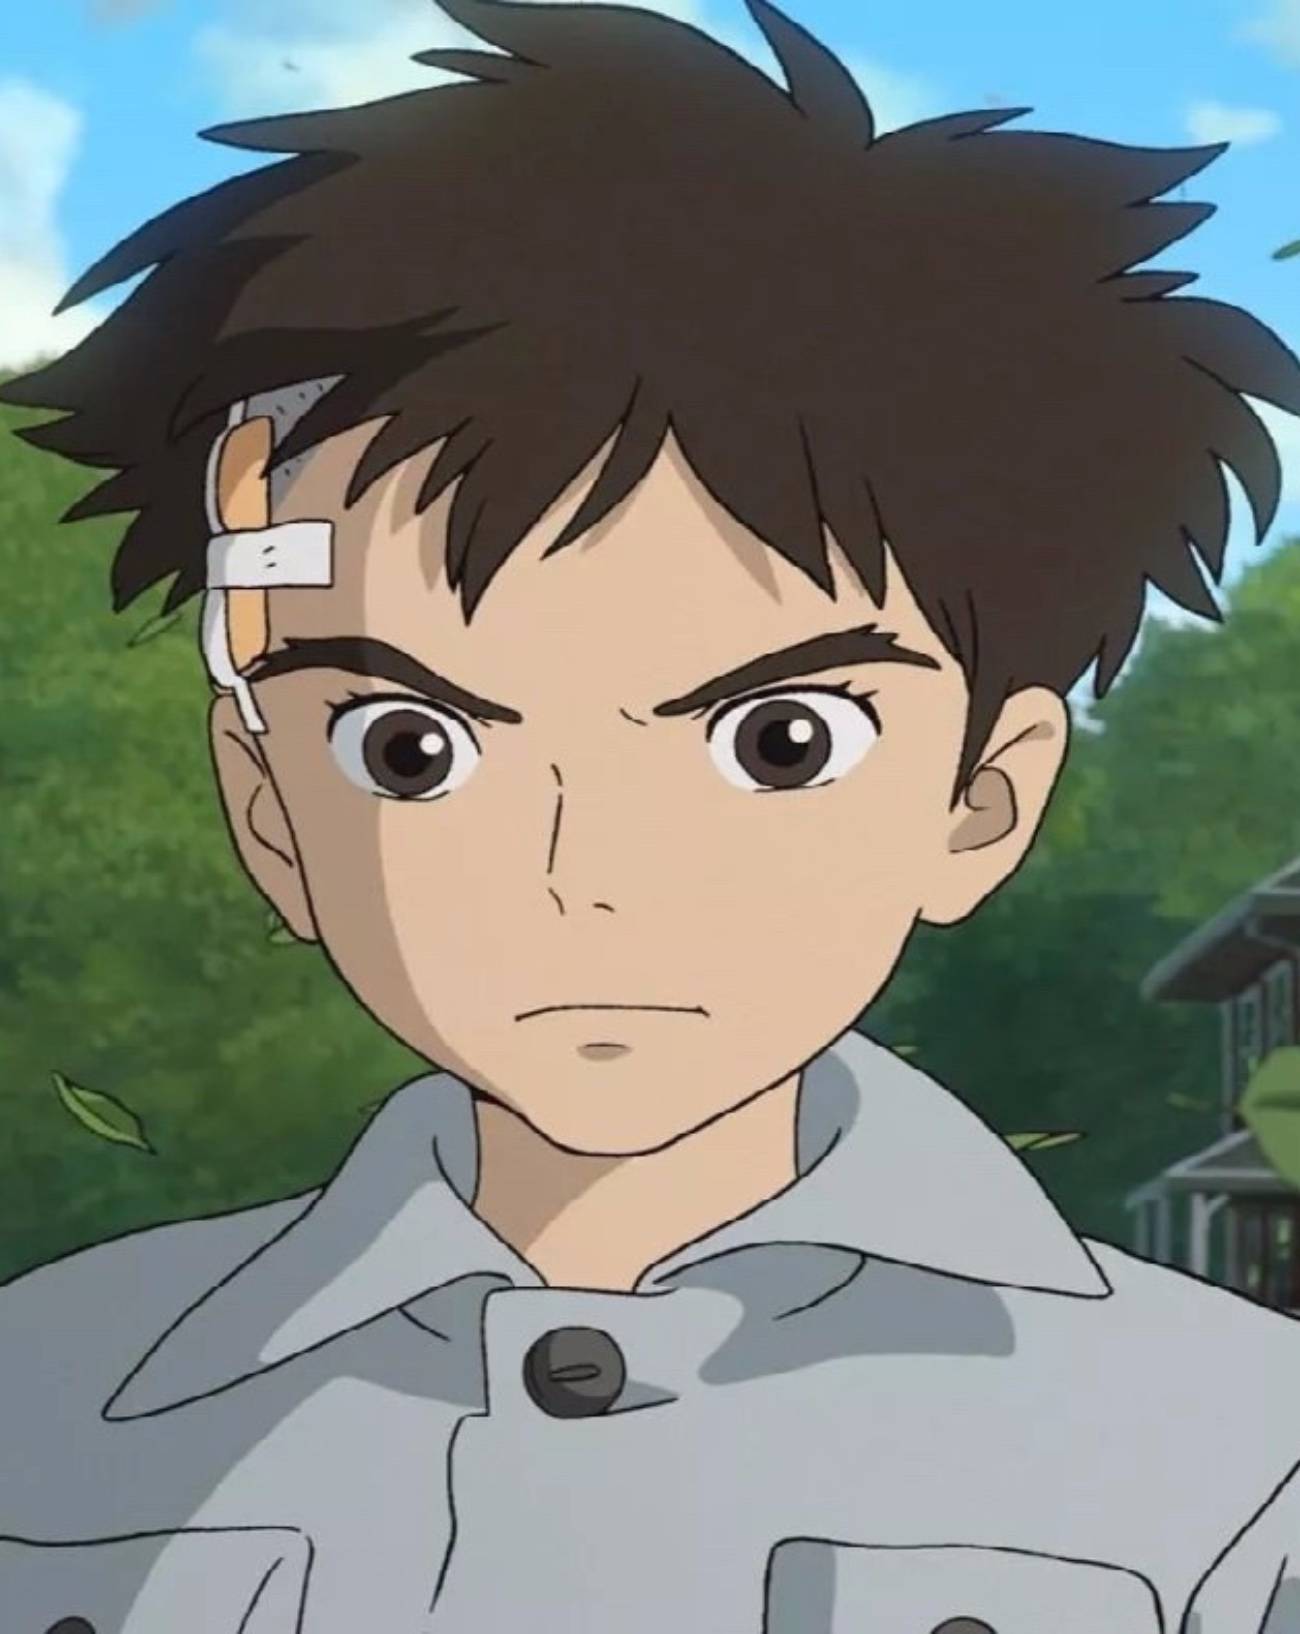 The Boy and the Heron: what is Miyazaki’s new film worth?